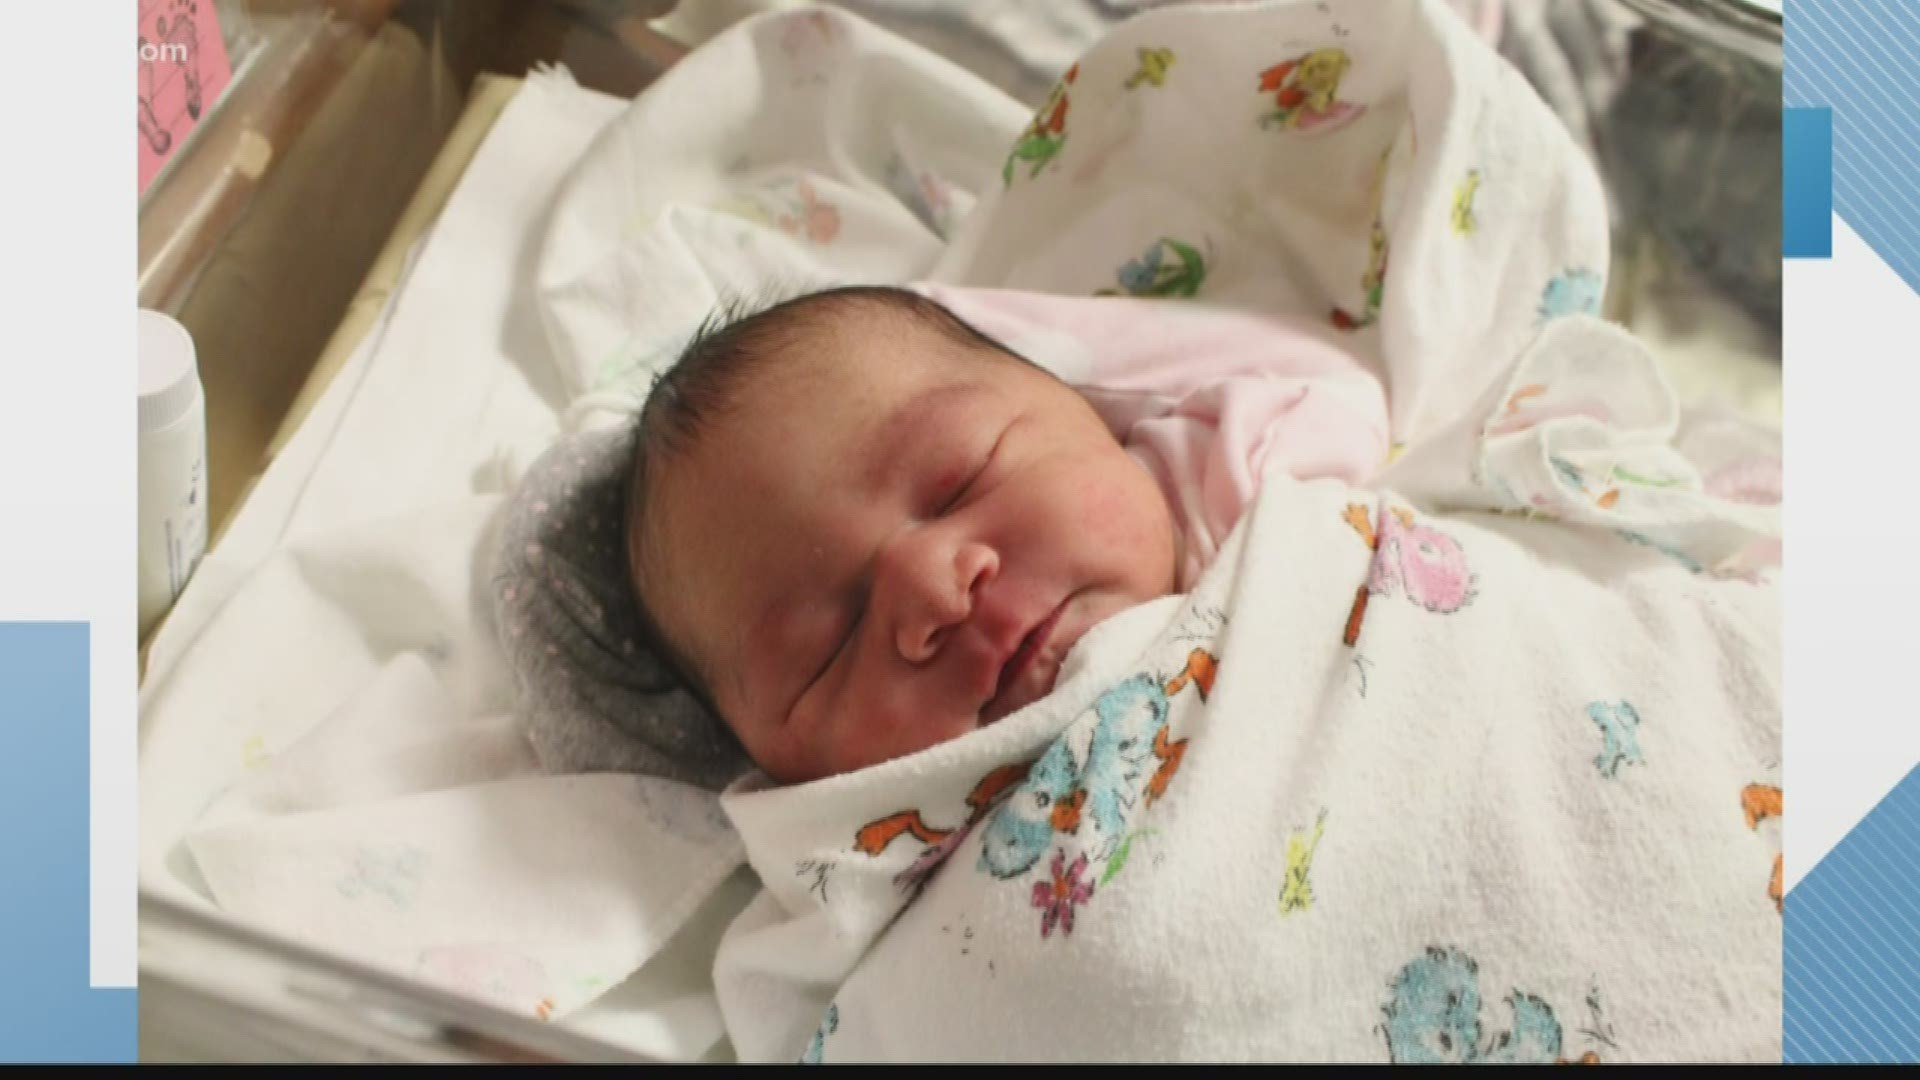 J'Amie Brown was born on July 11, at 7:11 p.m. weighing 7 pounds, 11 ounces. A hospital spokeswoman said J'Aime and her mom are doing great.